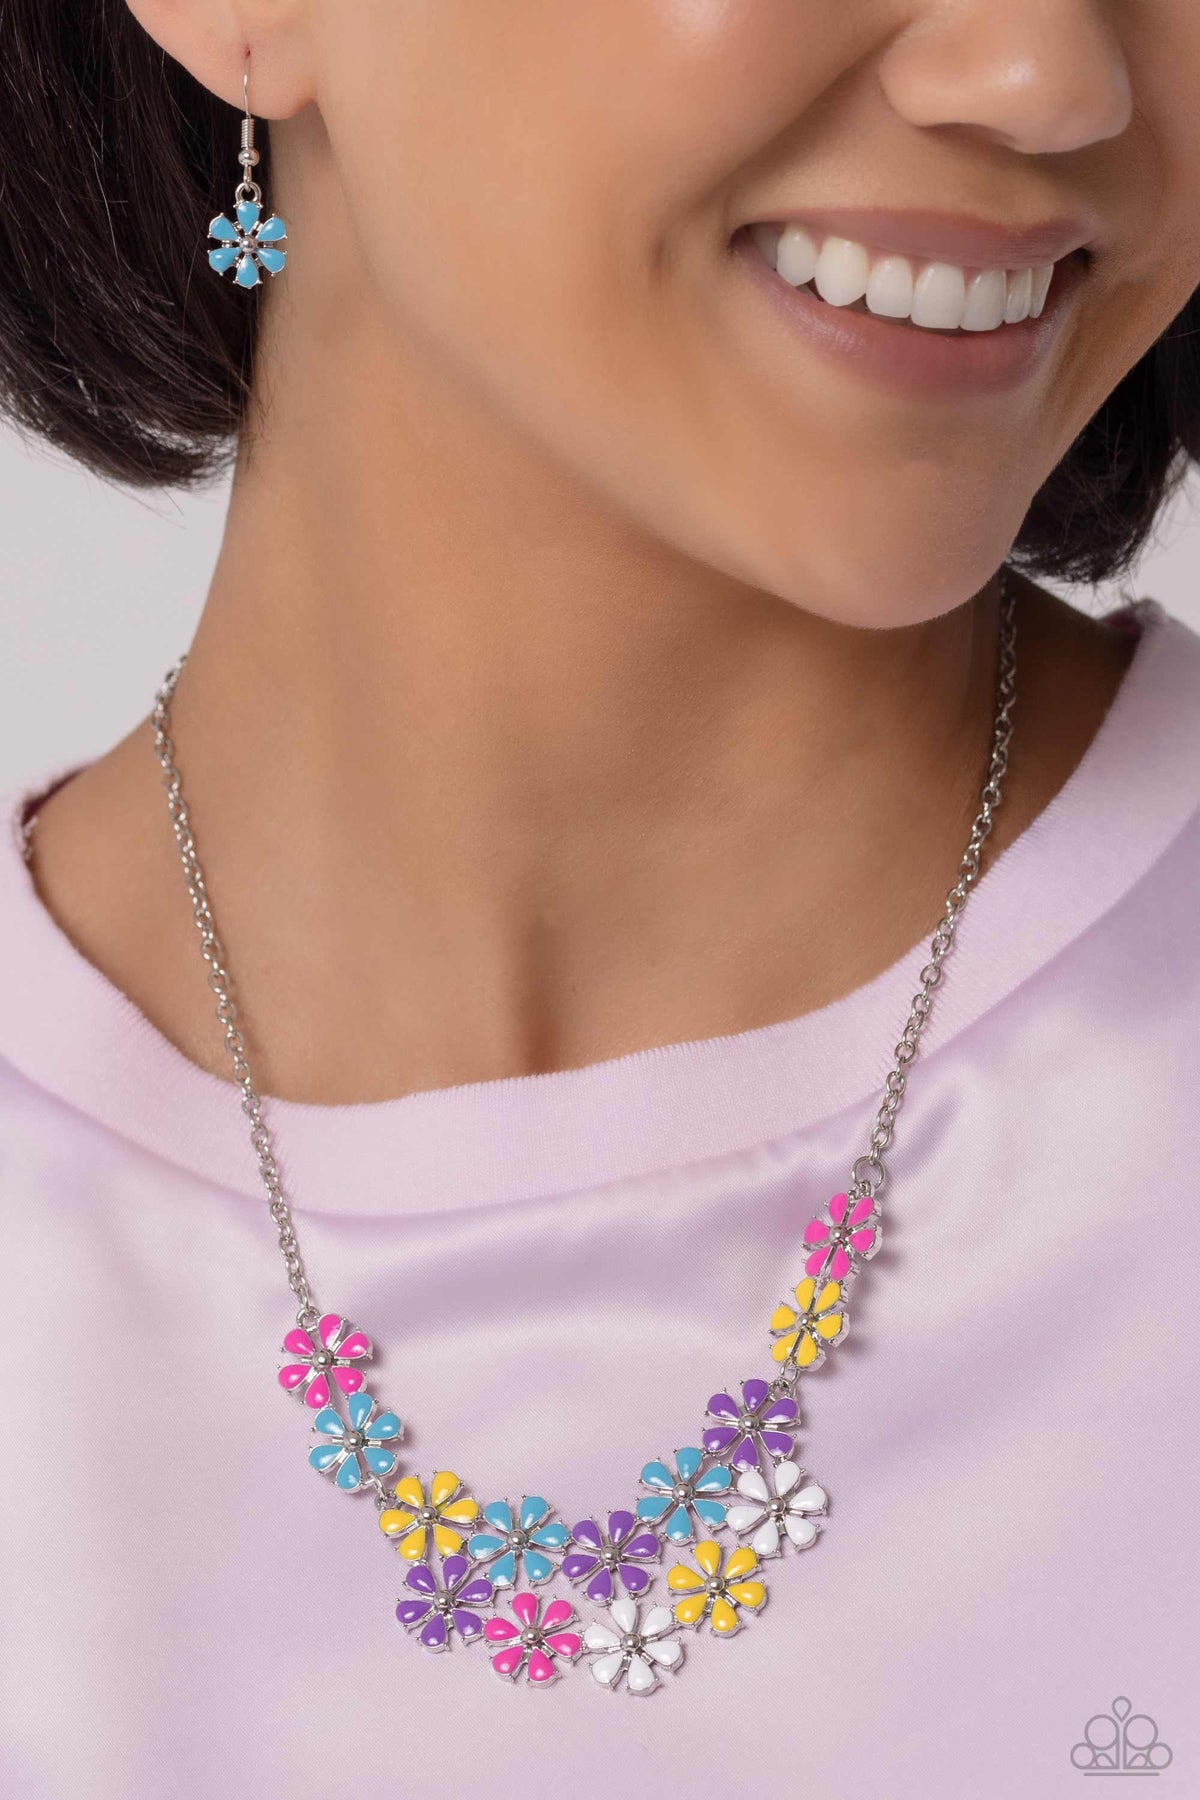 Floral Fever Multi Flower Necklace - Paparazzi Accessories-on model - CarasShop.com - $5 Jewelry by Cara Jewels